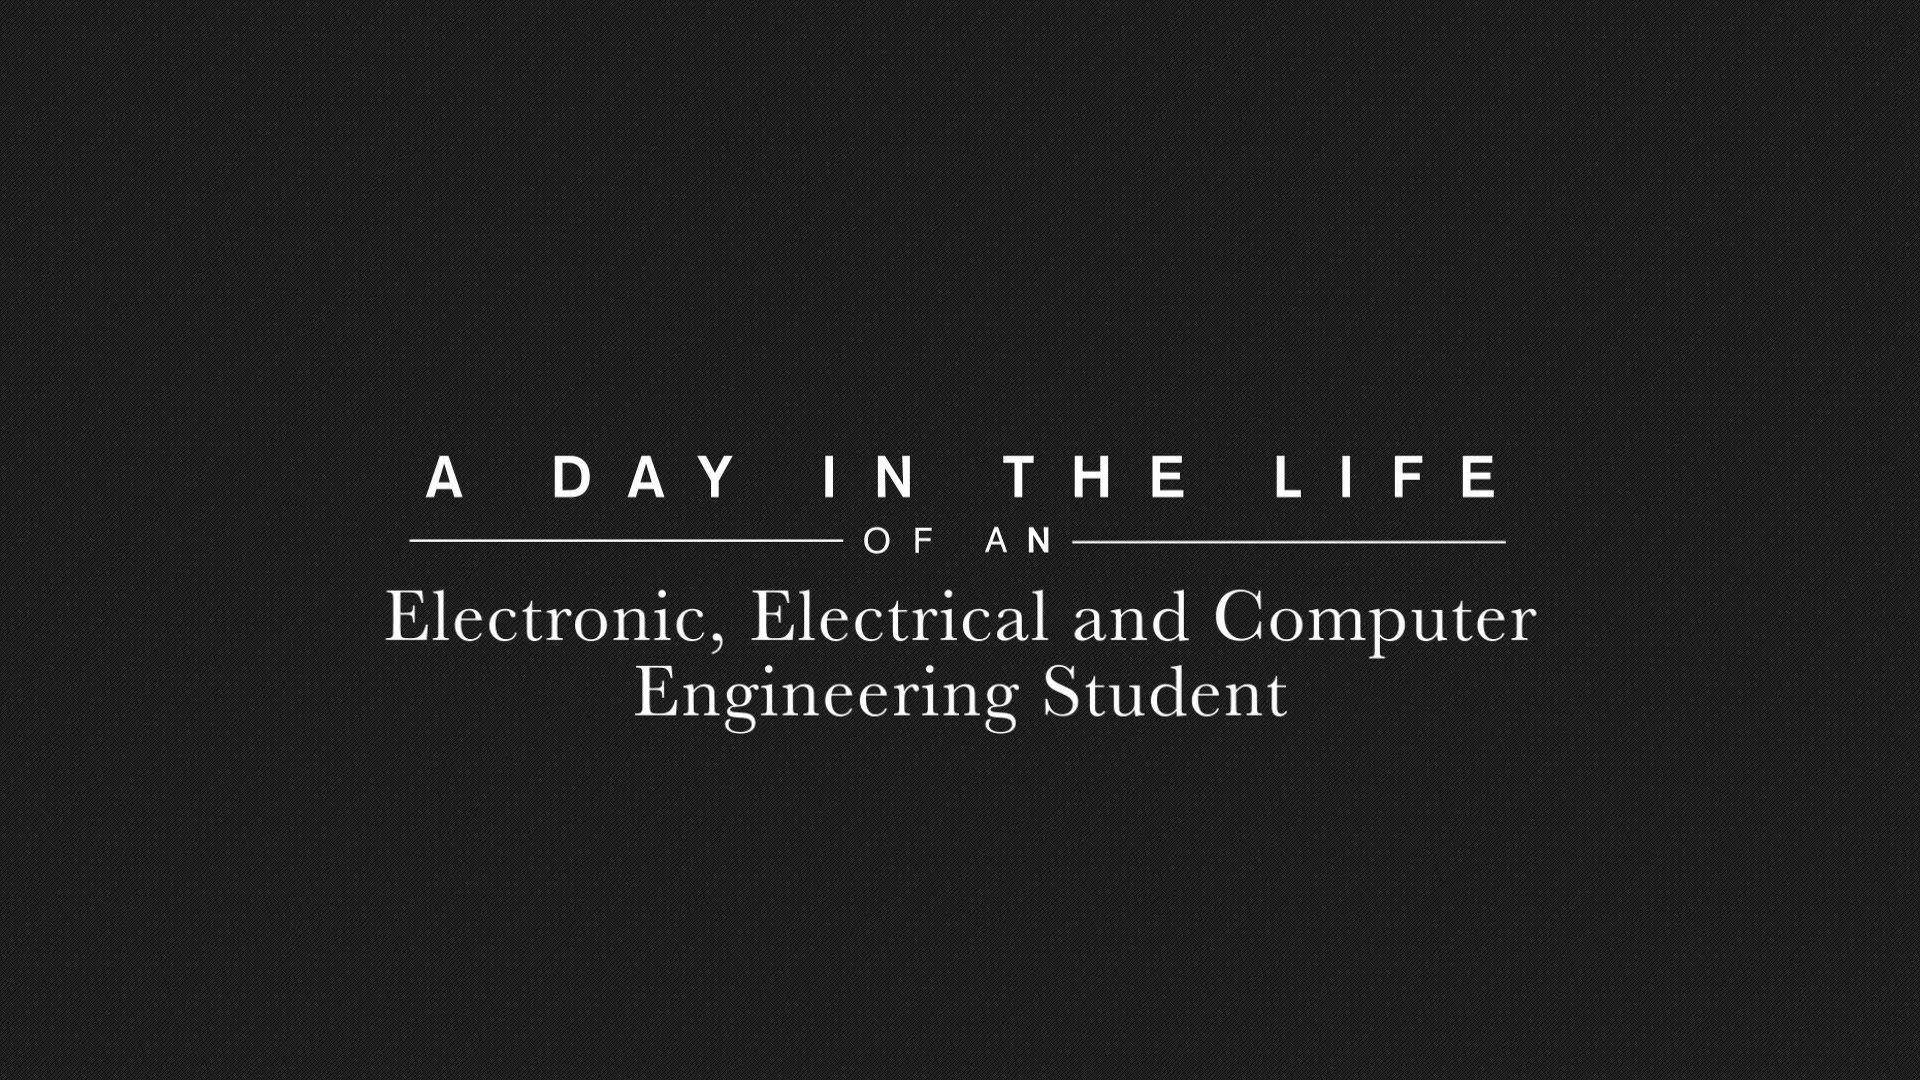 A Day in the Life of an Electronic, Electrical and Computer